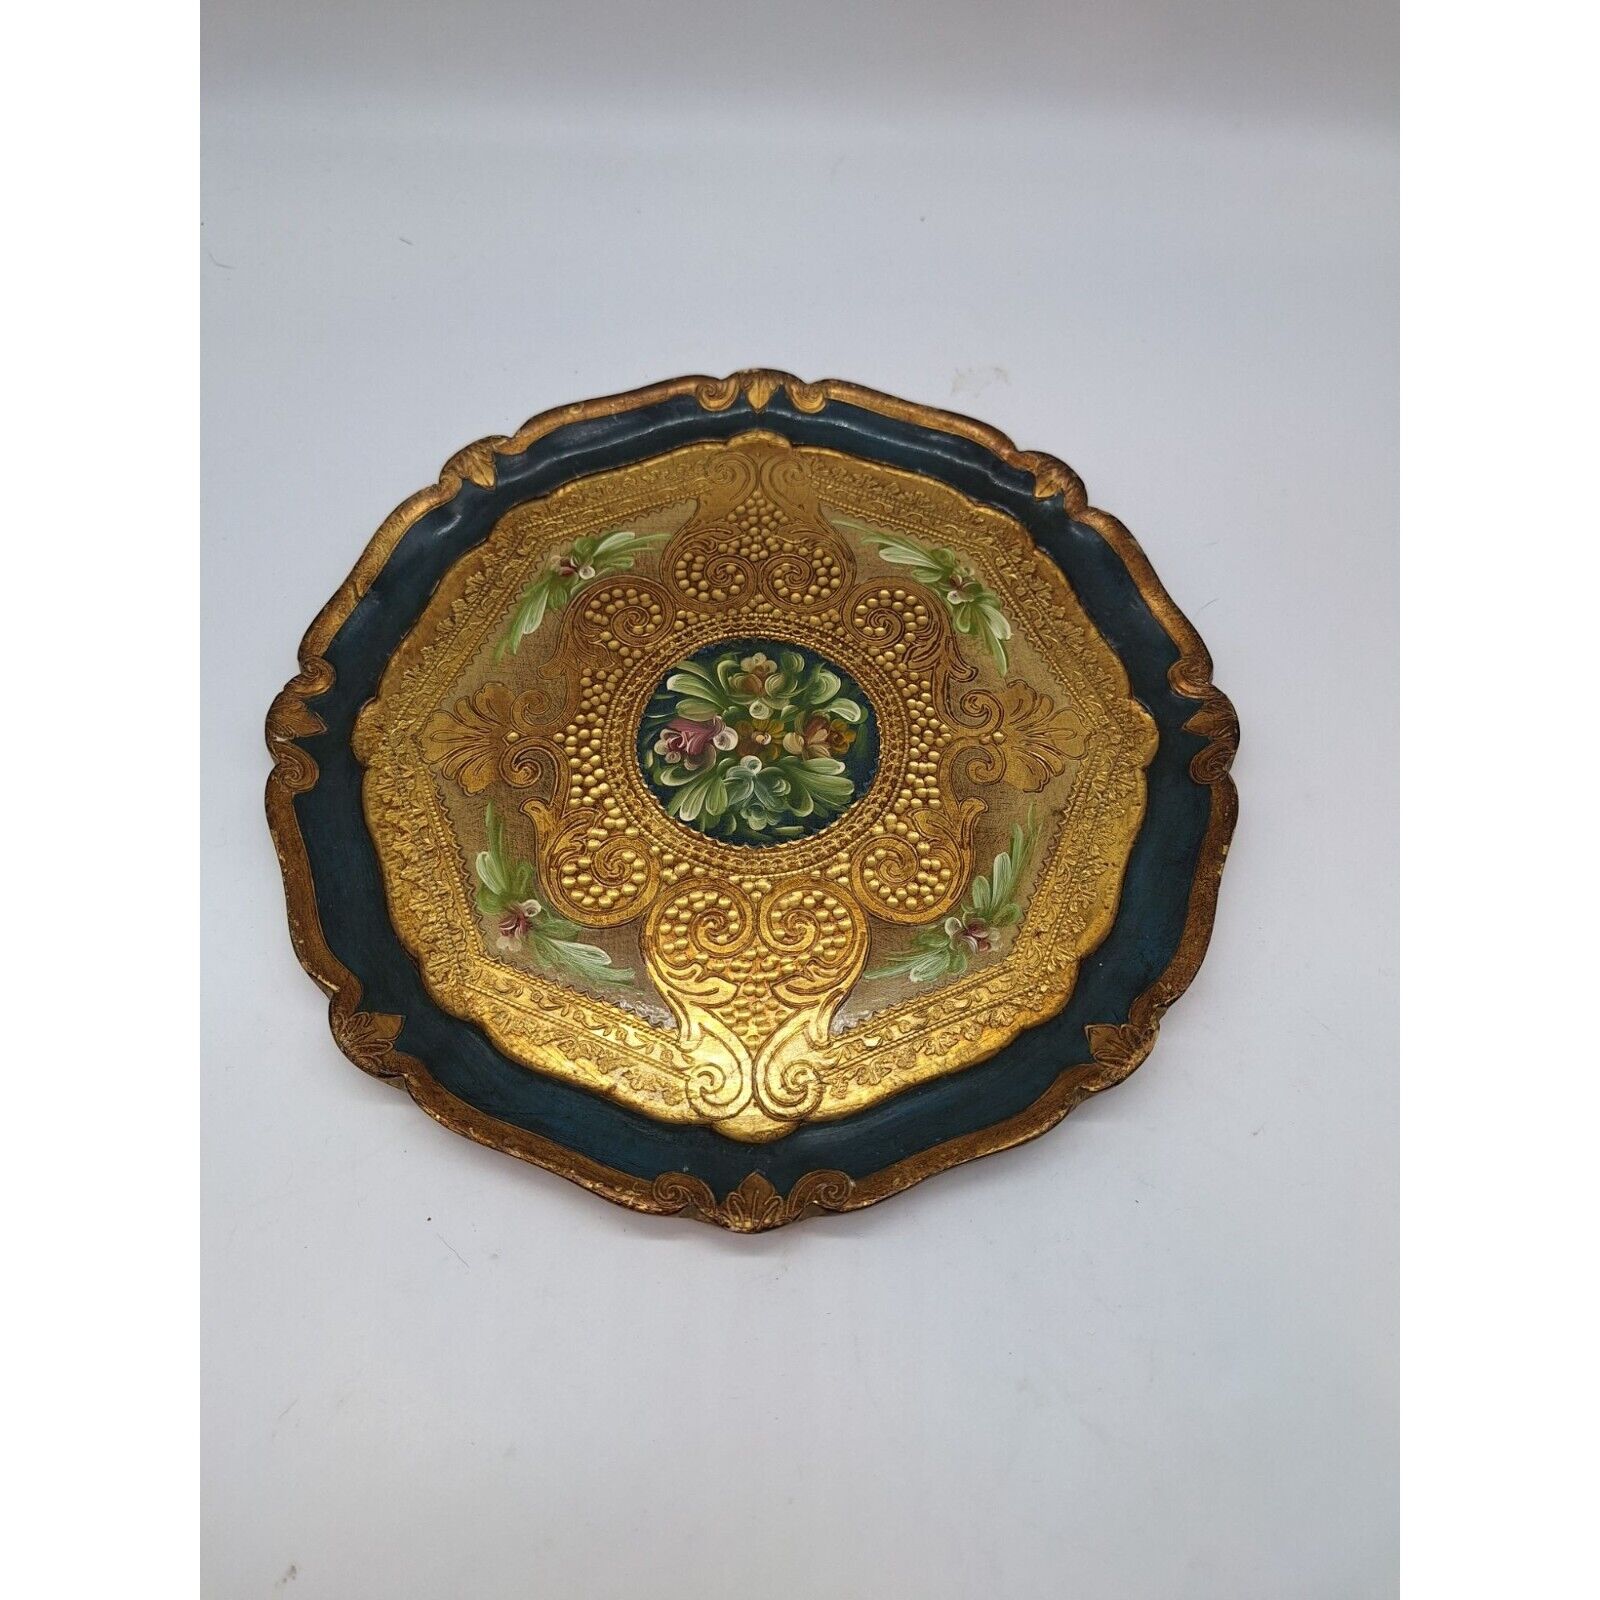 Vintage Italian Florentine painted decorative tray ornate round wood gold floral